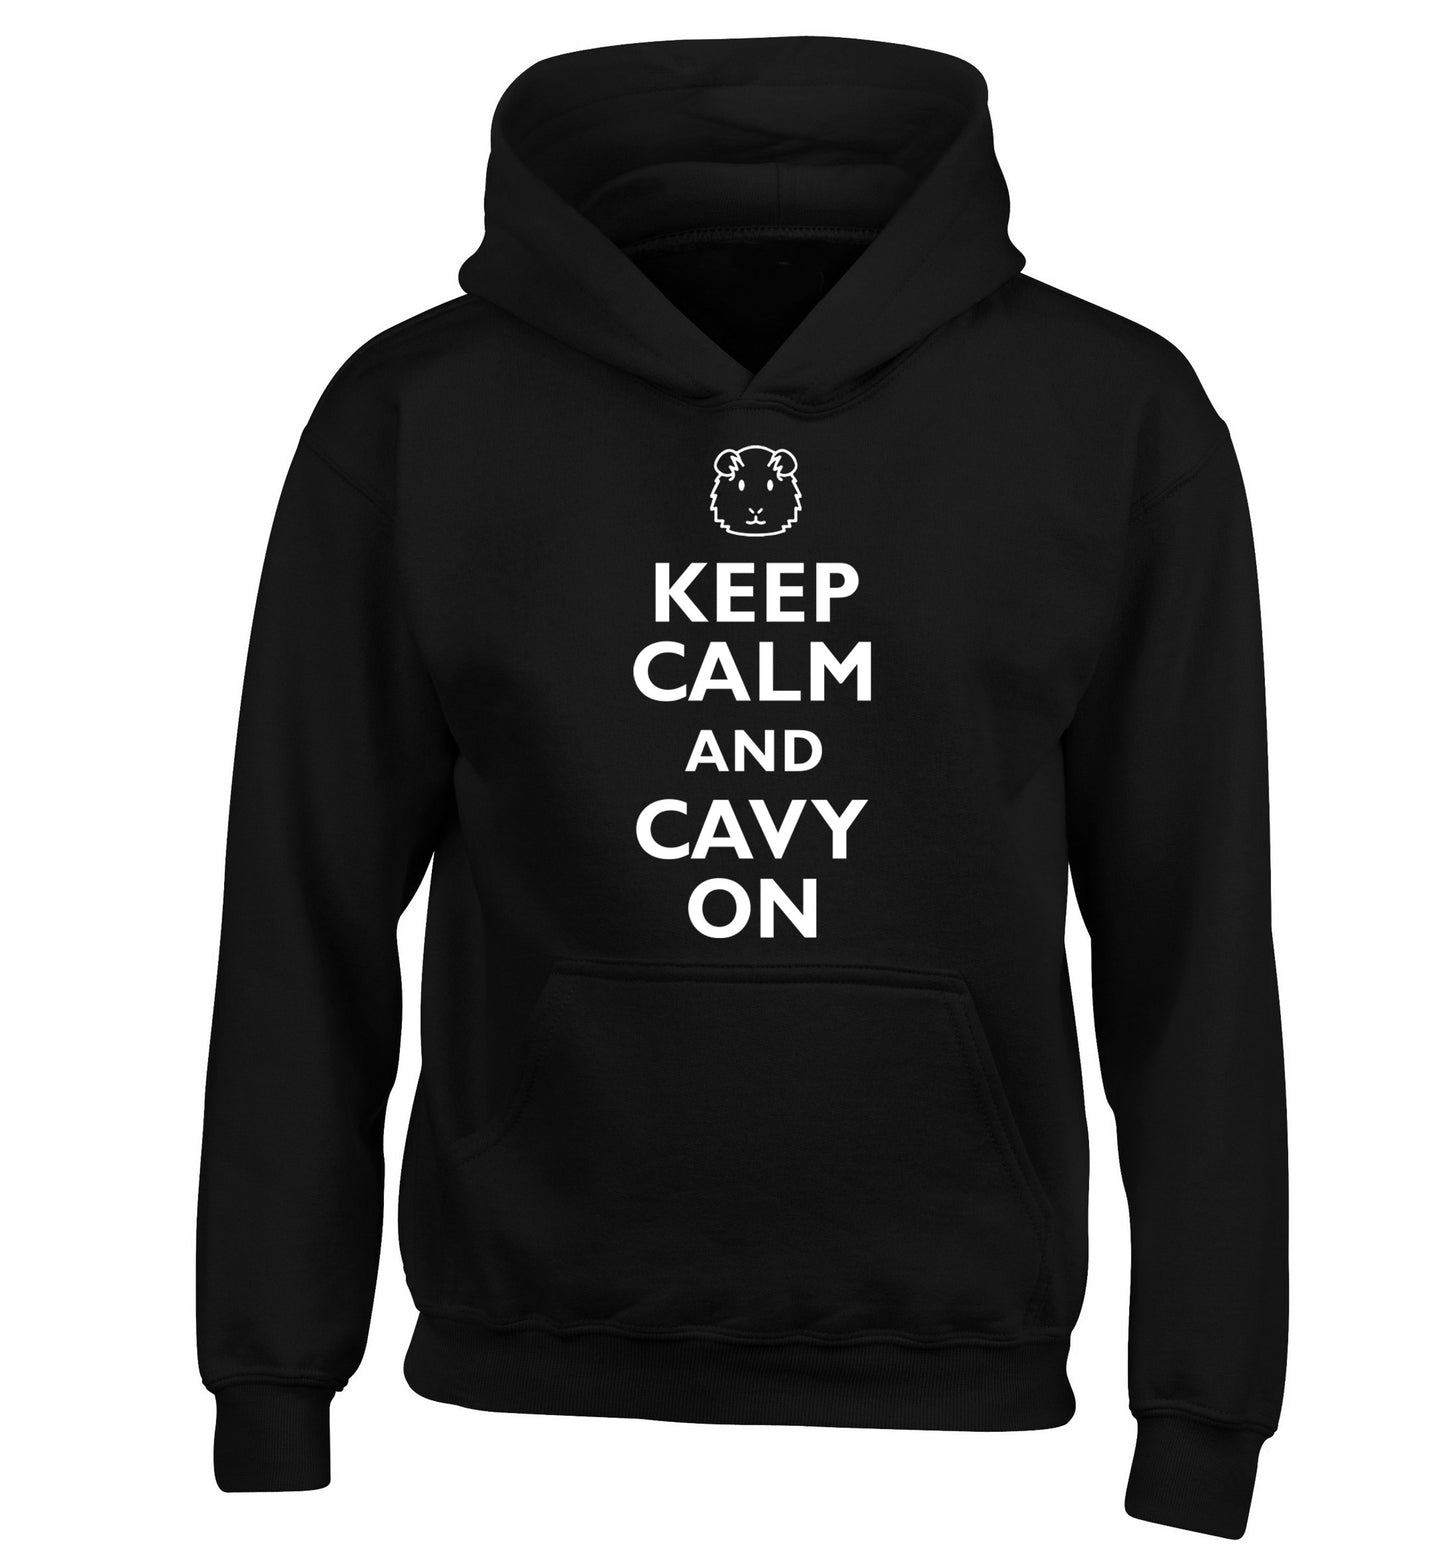 Keep calm and cavvy on children's black hoodie 12-14 Years